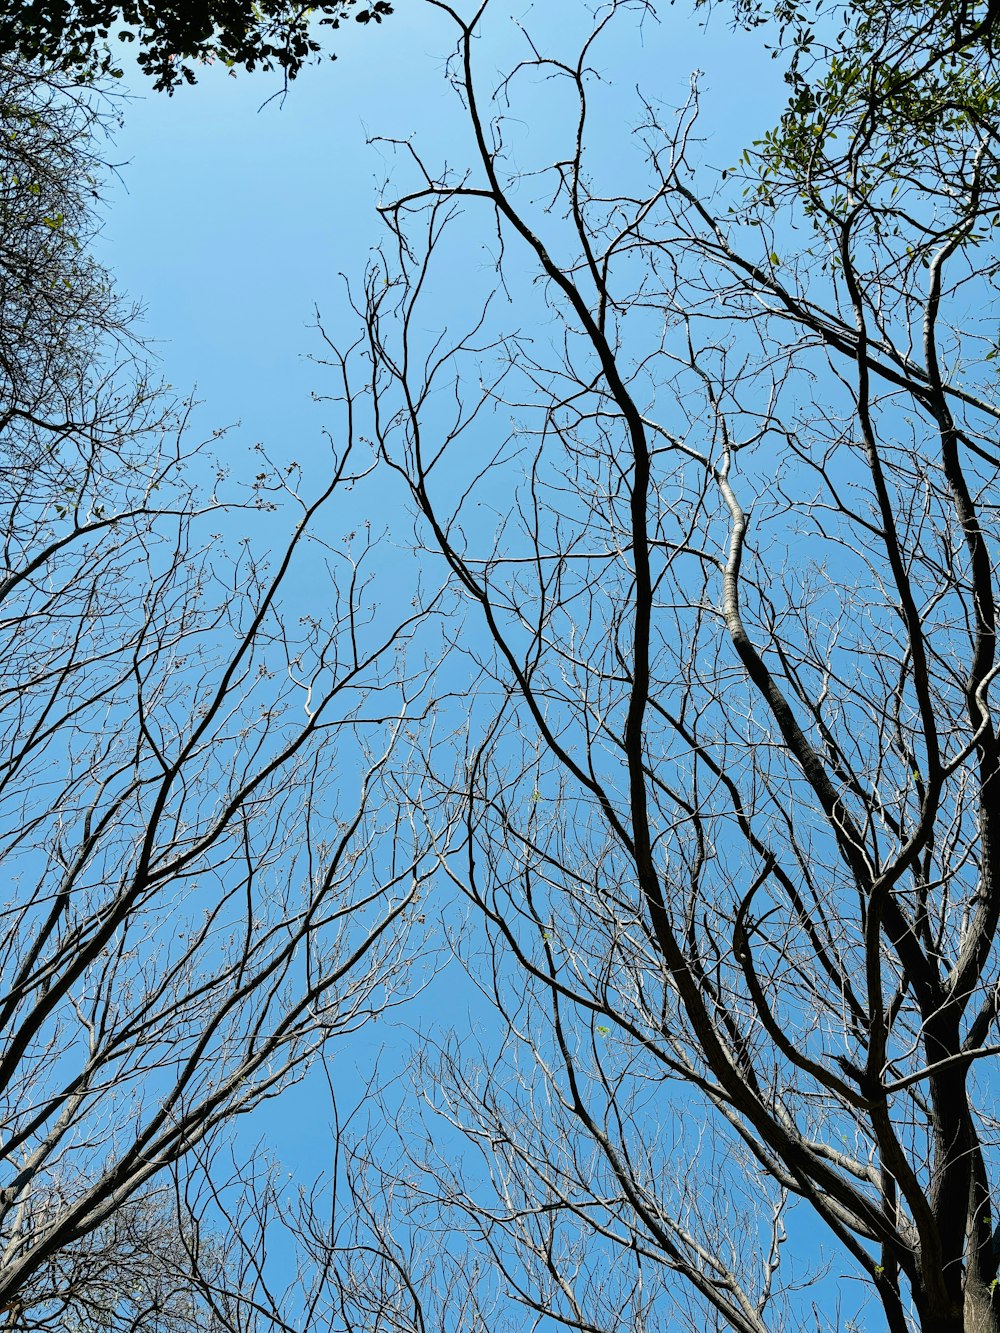 bare trees against a blue sky with no leaves